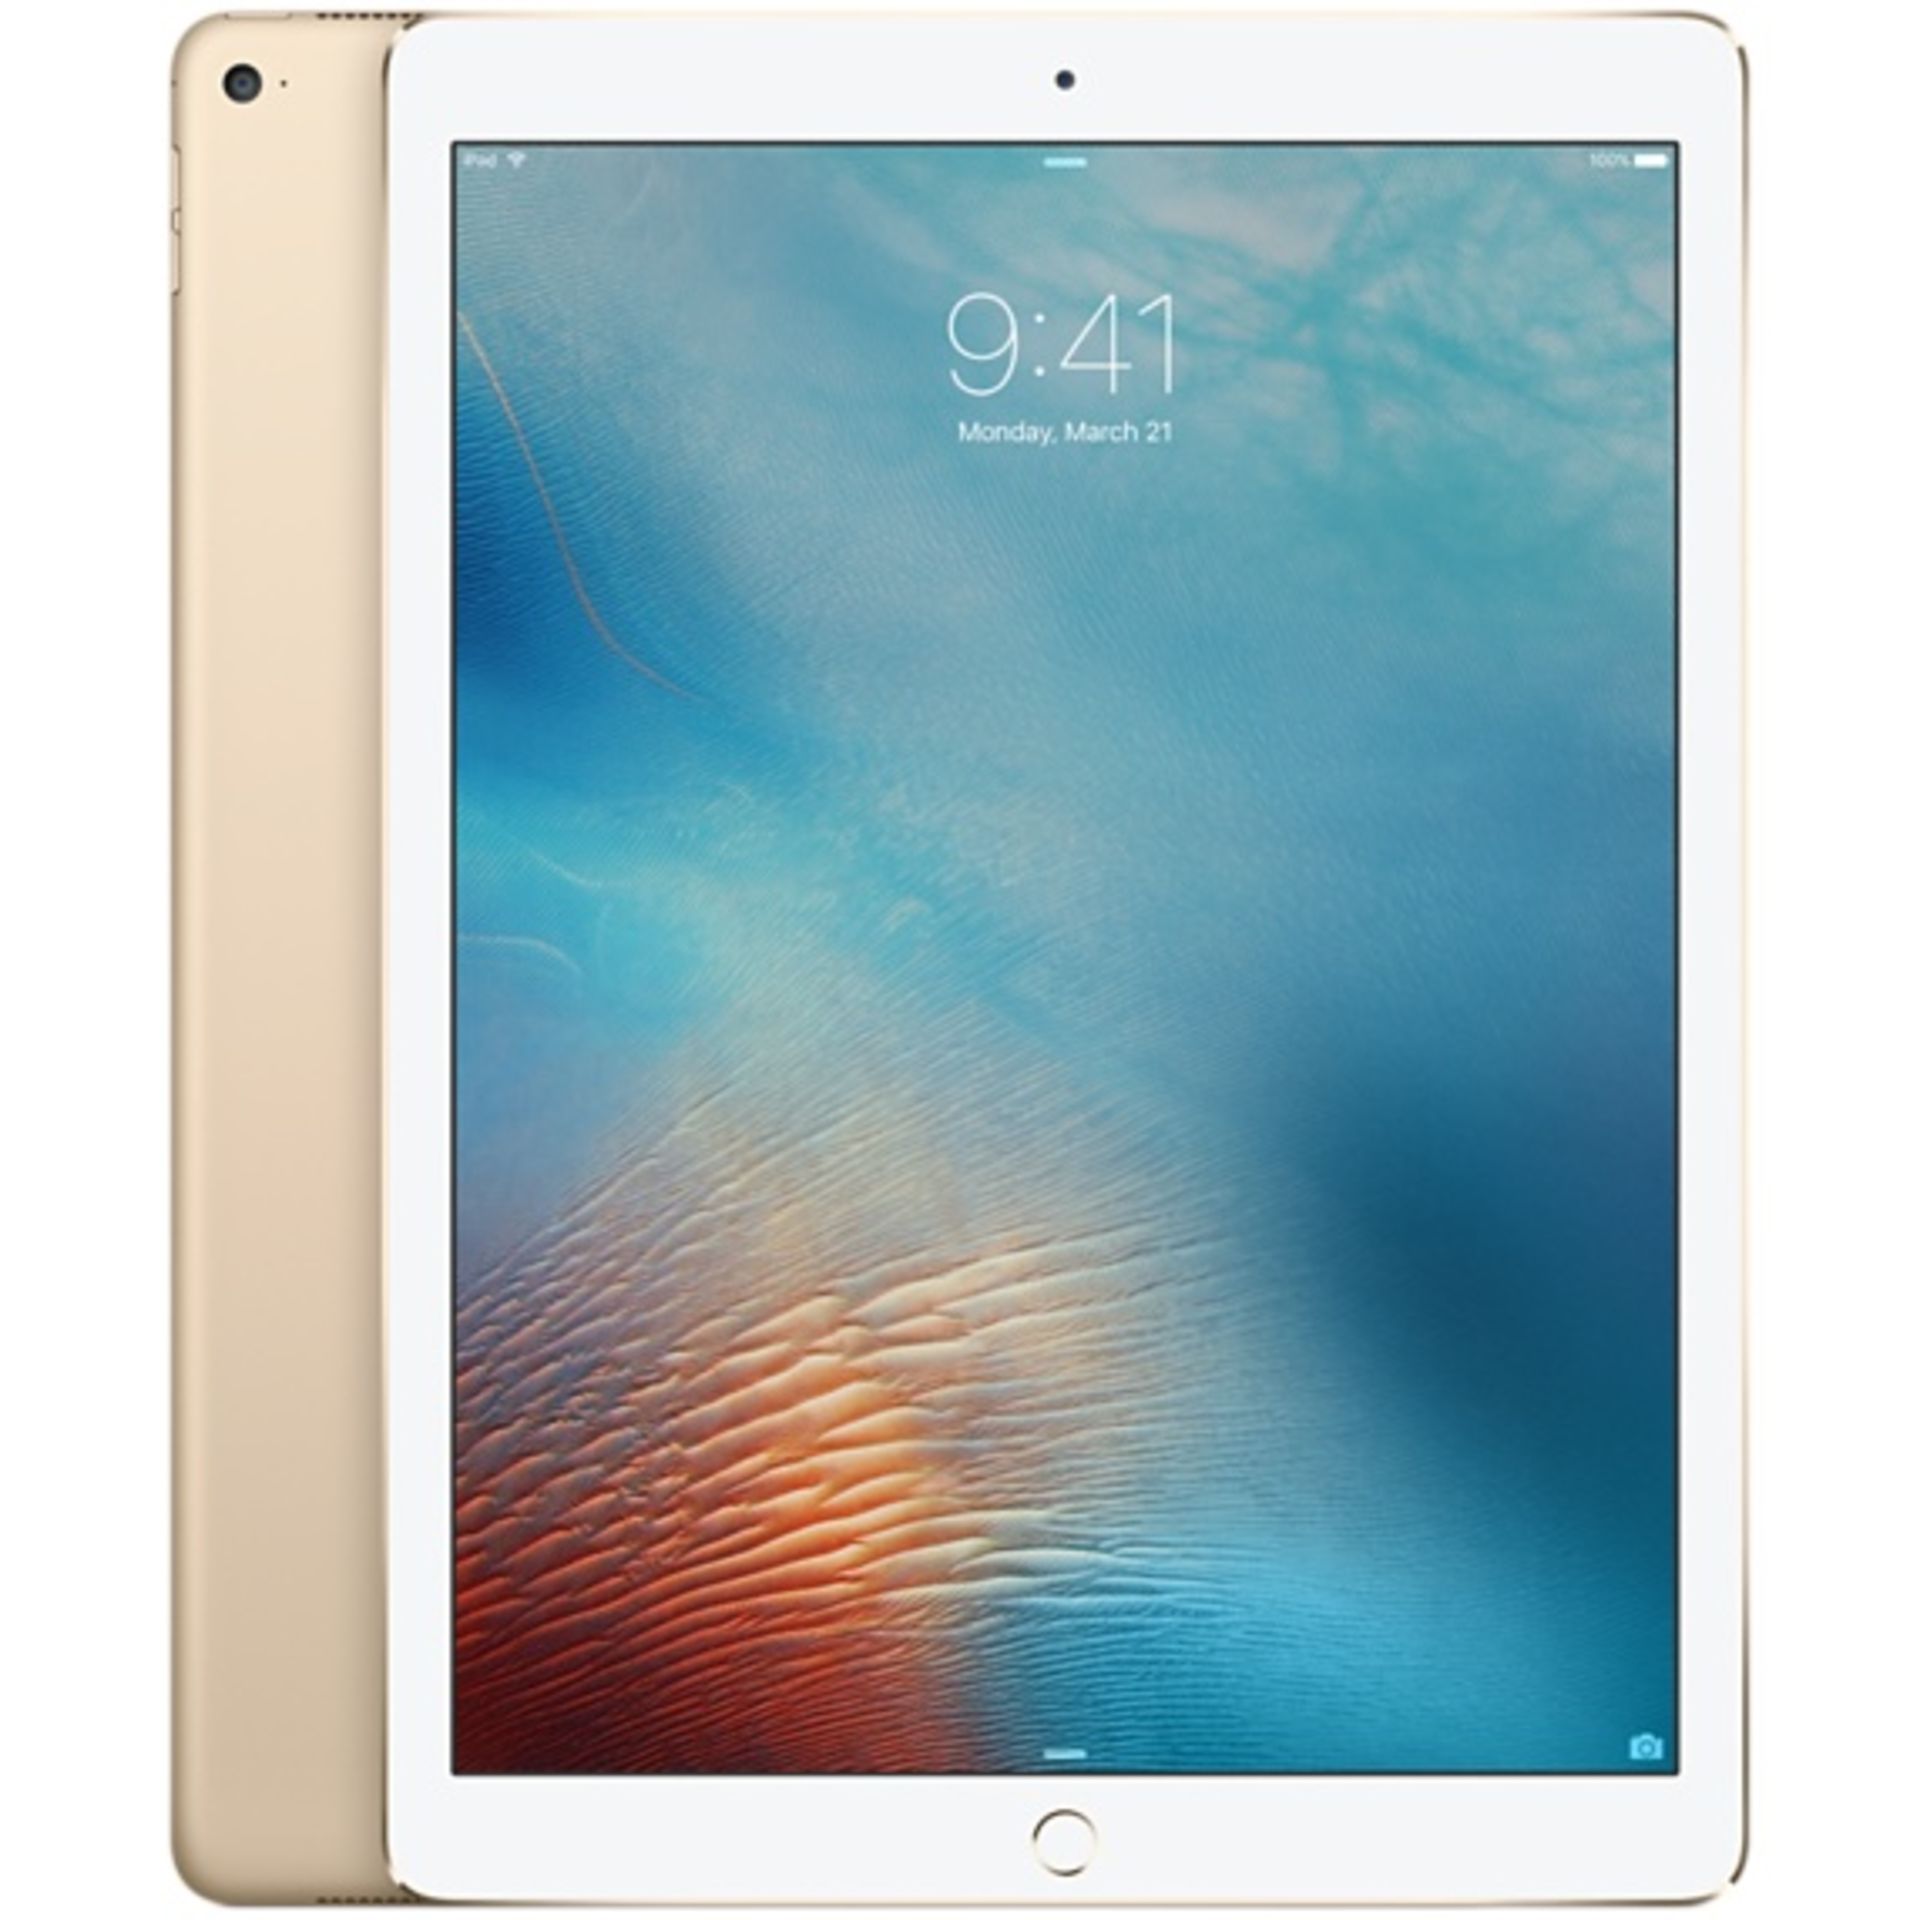 V Brand New Apple iPad Pro 12.9" Gold 32GB - Wi-Fi Only - with accessories and original box